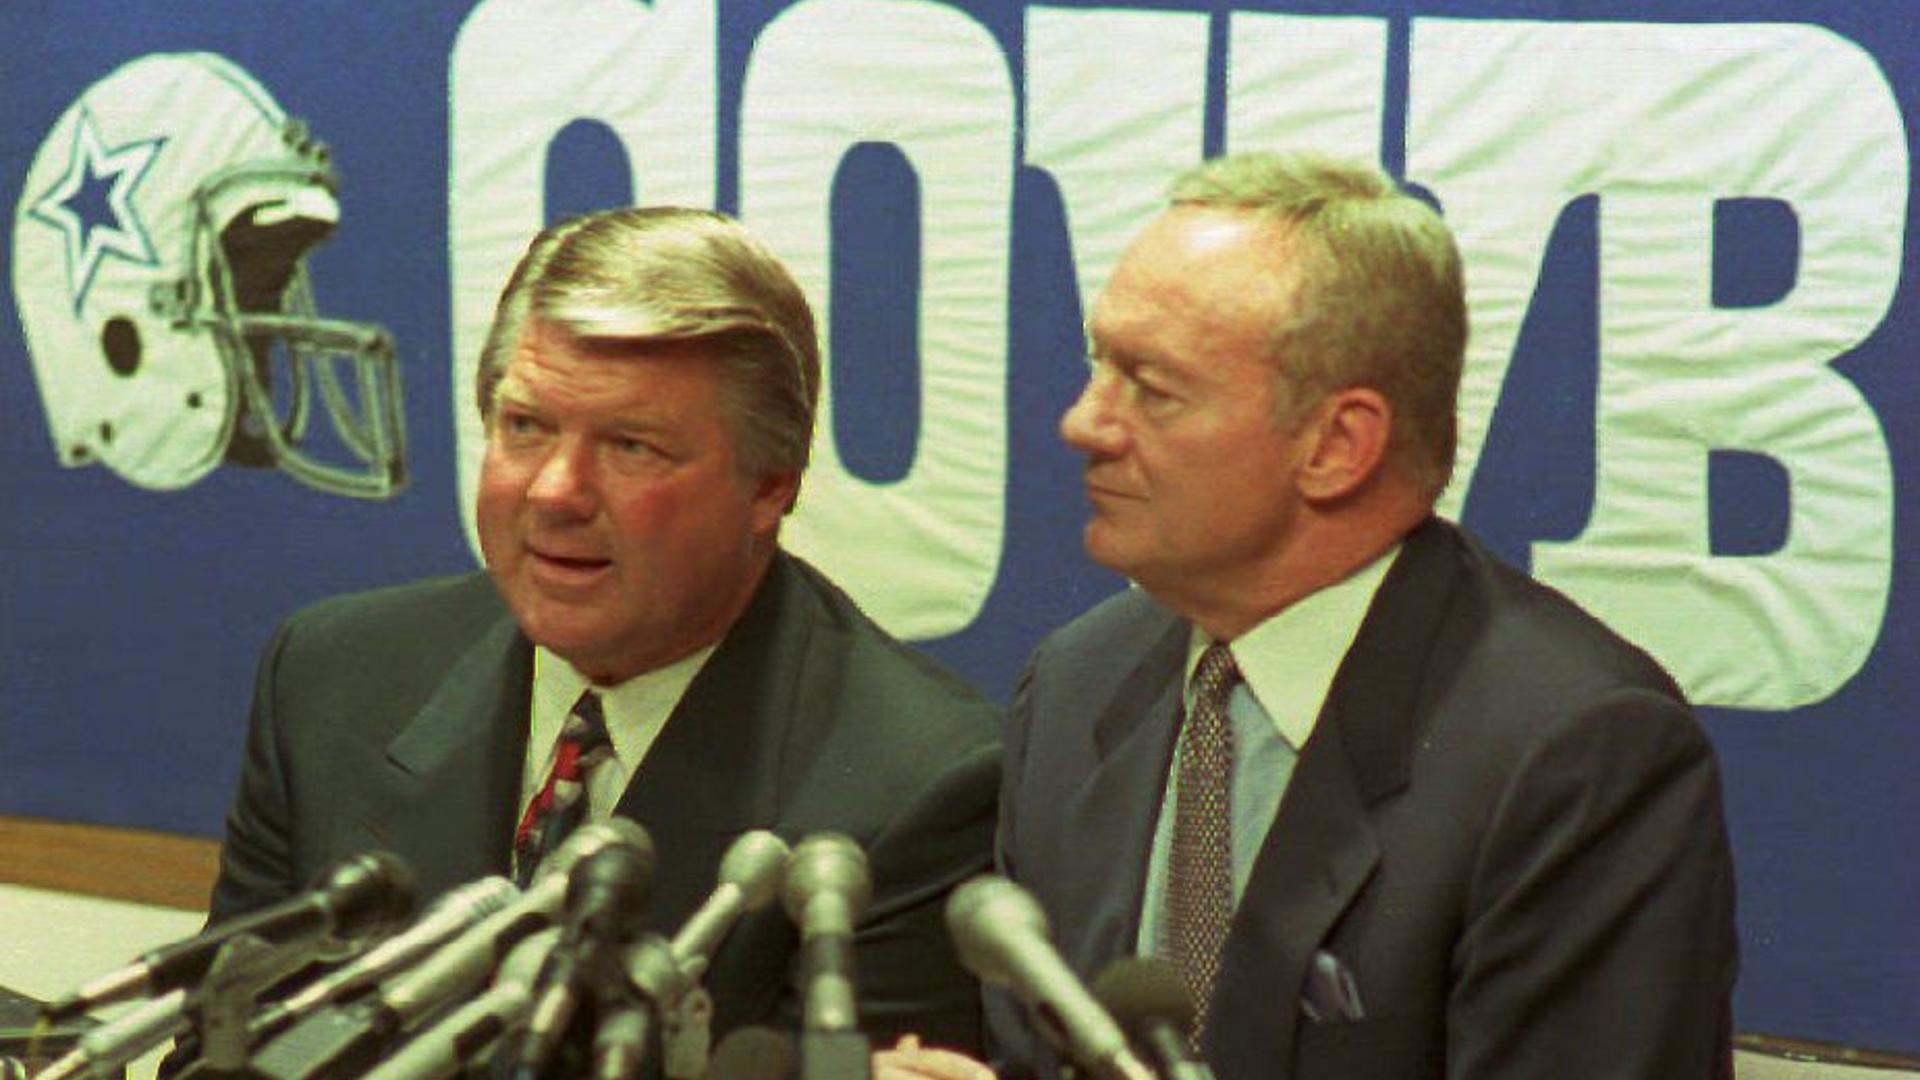 Jimmy Johnson discusses how Jerry Jones 'hurt' him before his departure from Dallas